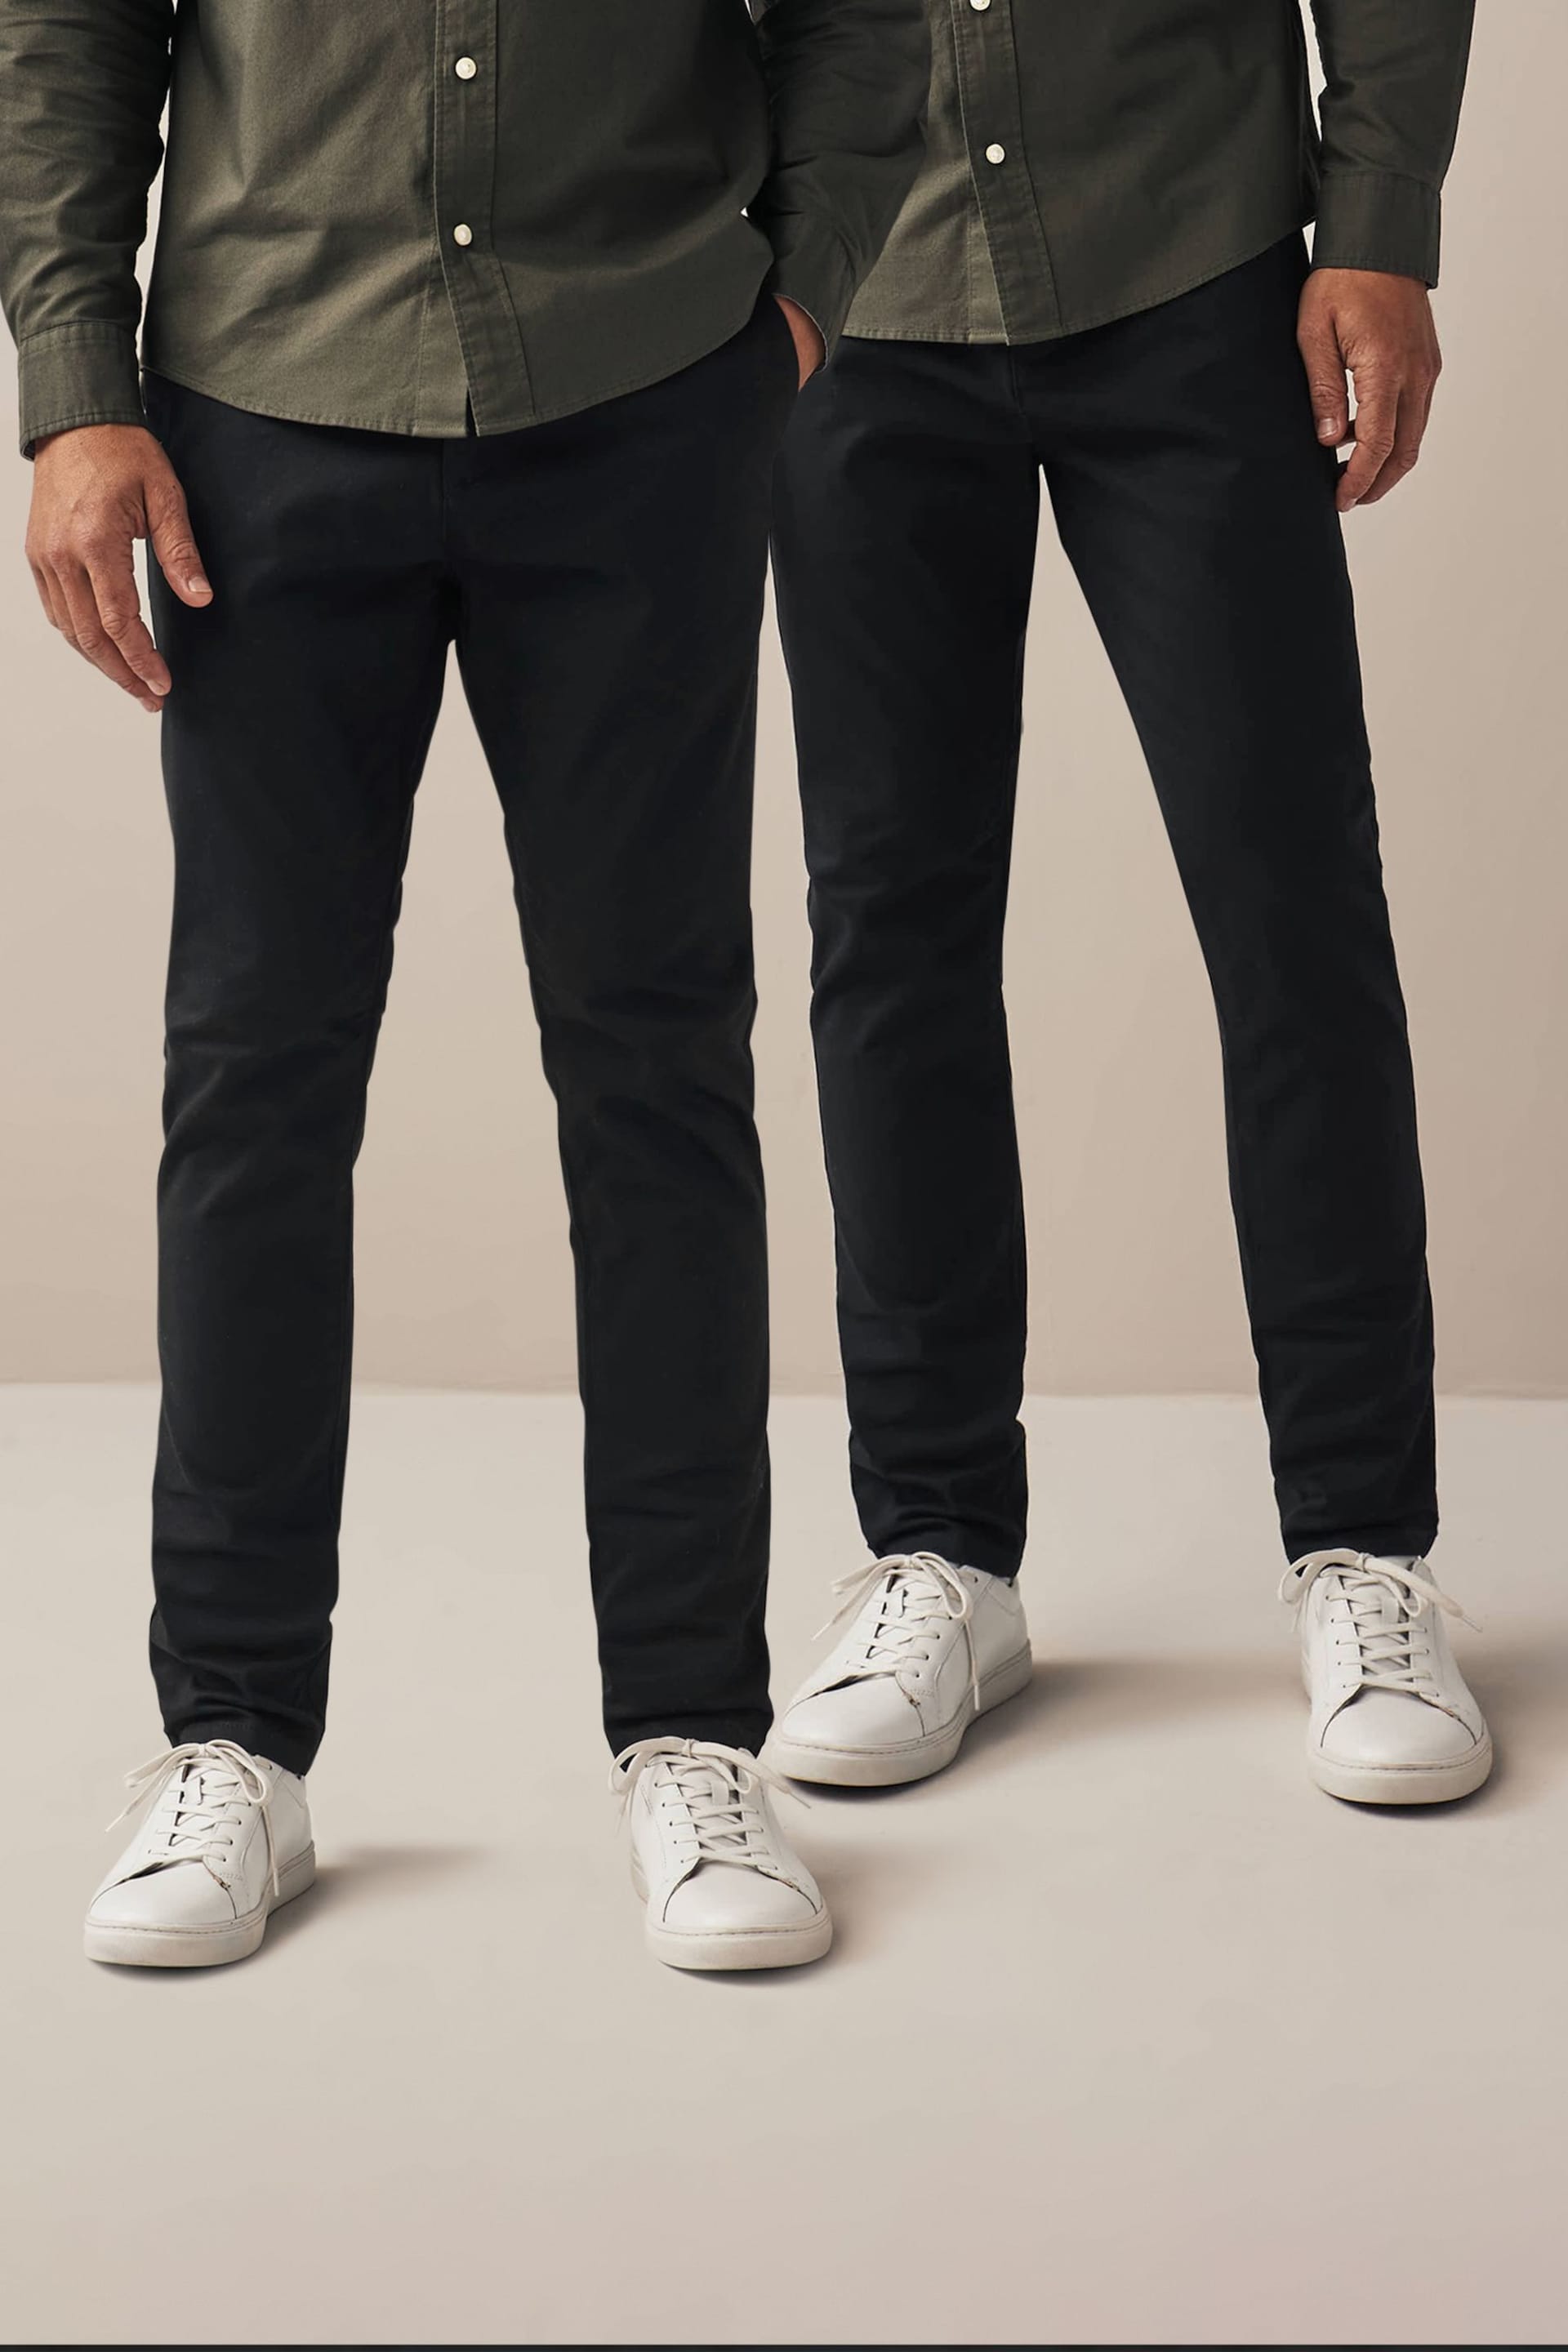 Black Skinny Stretch Chino Trousers 2 Pack - Image 1 of 9